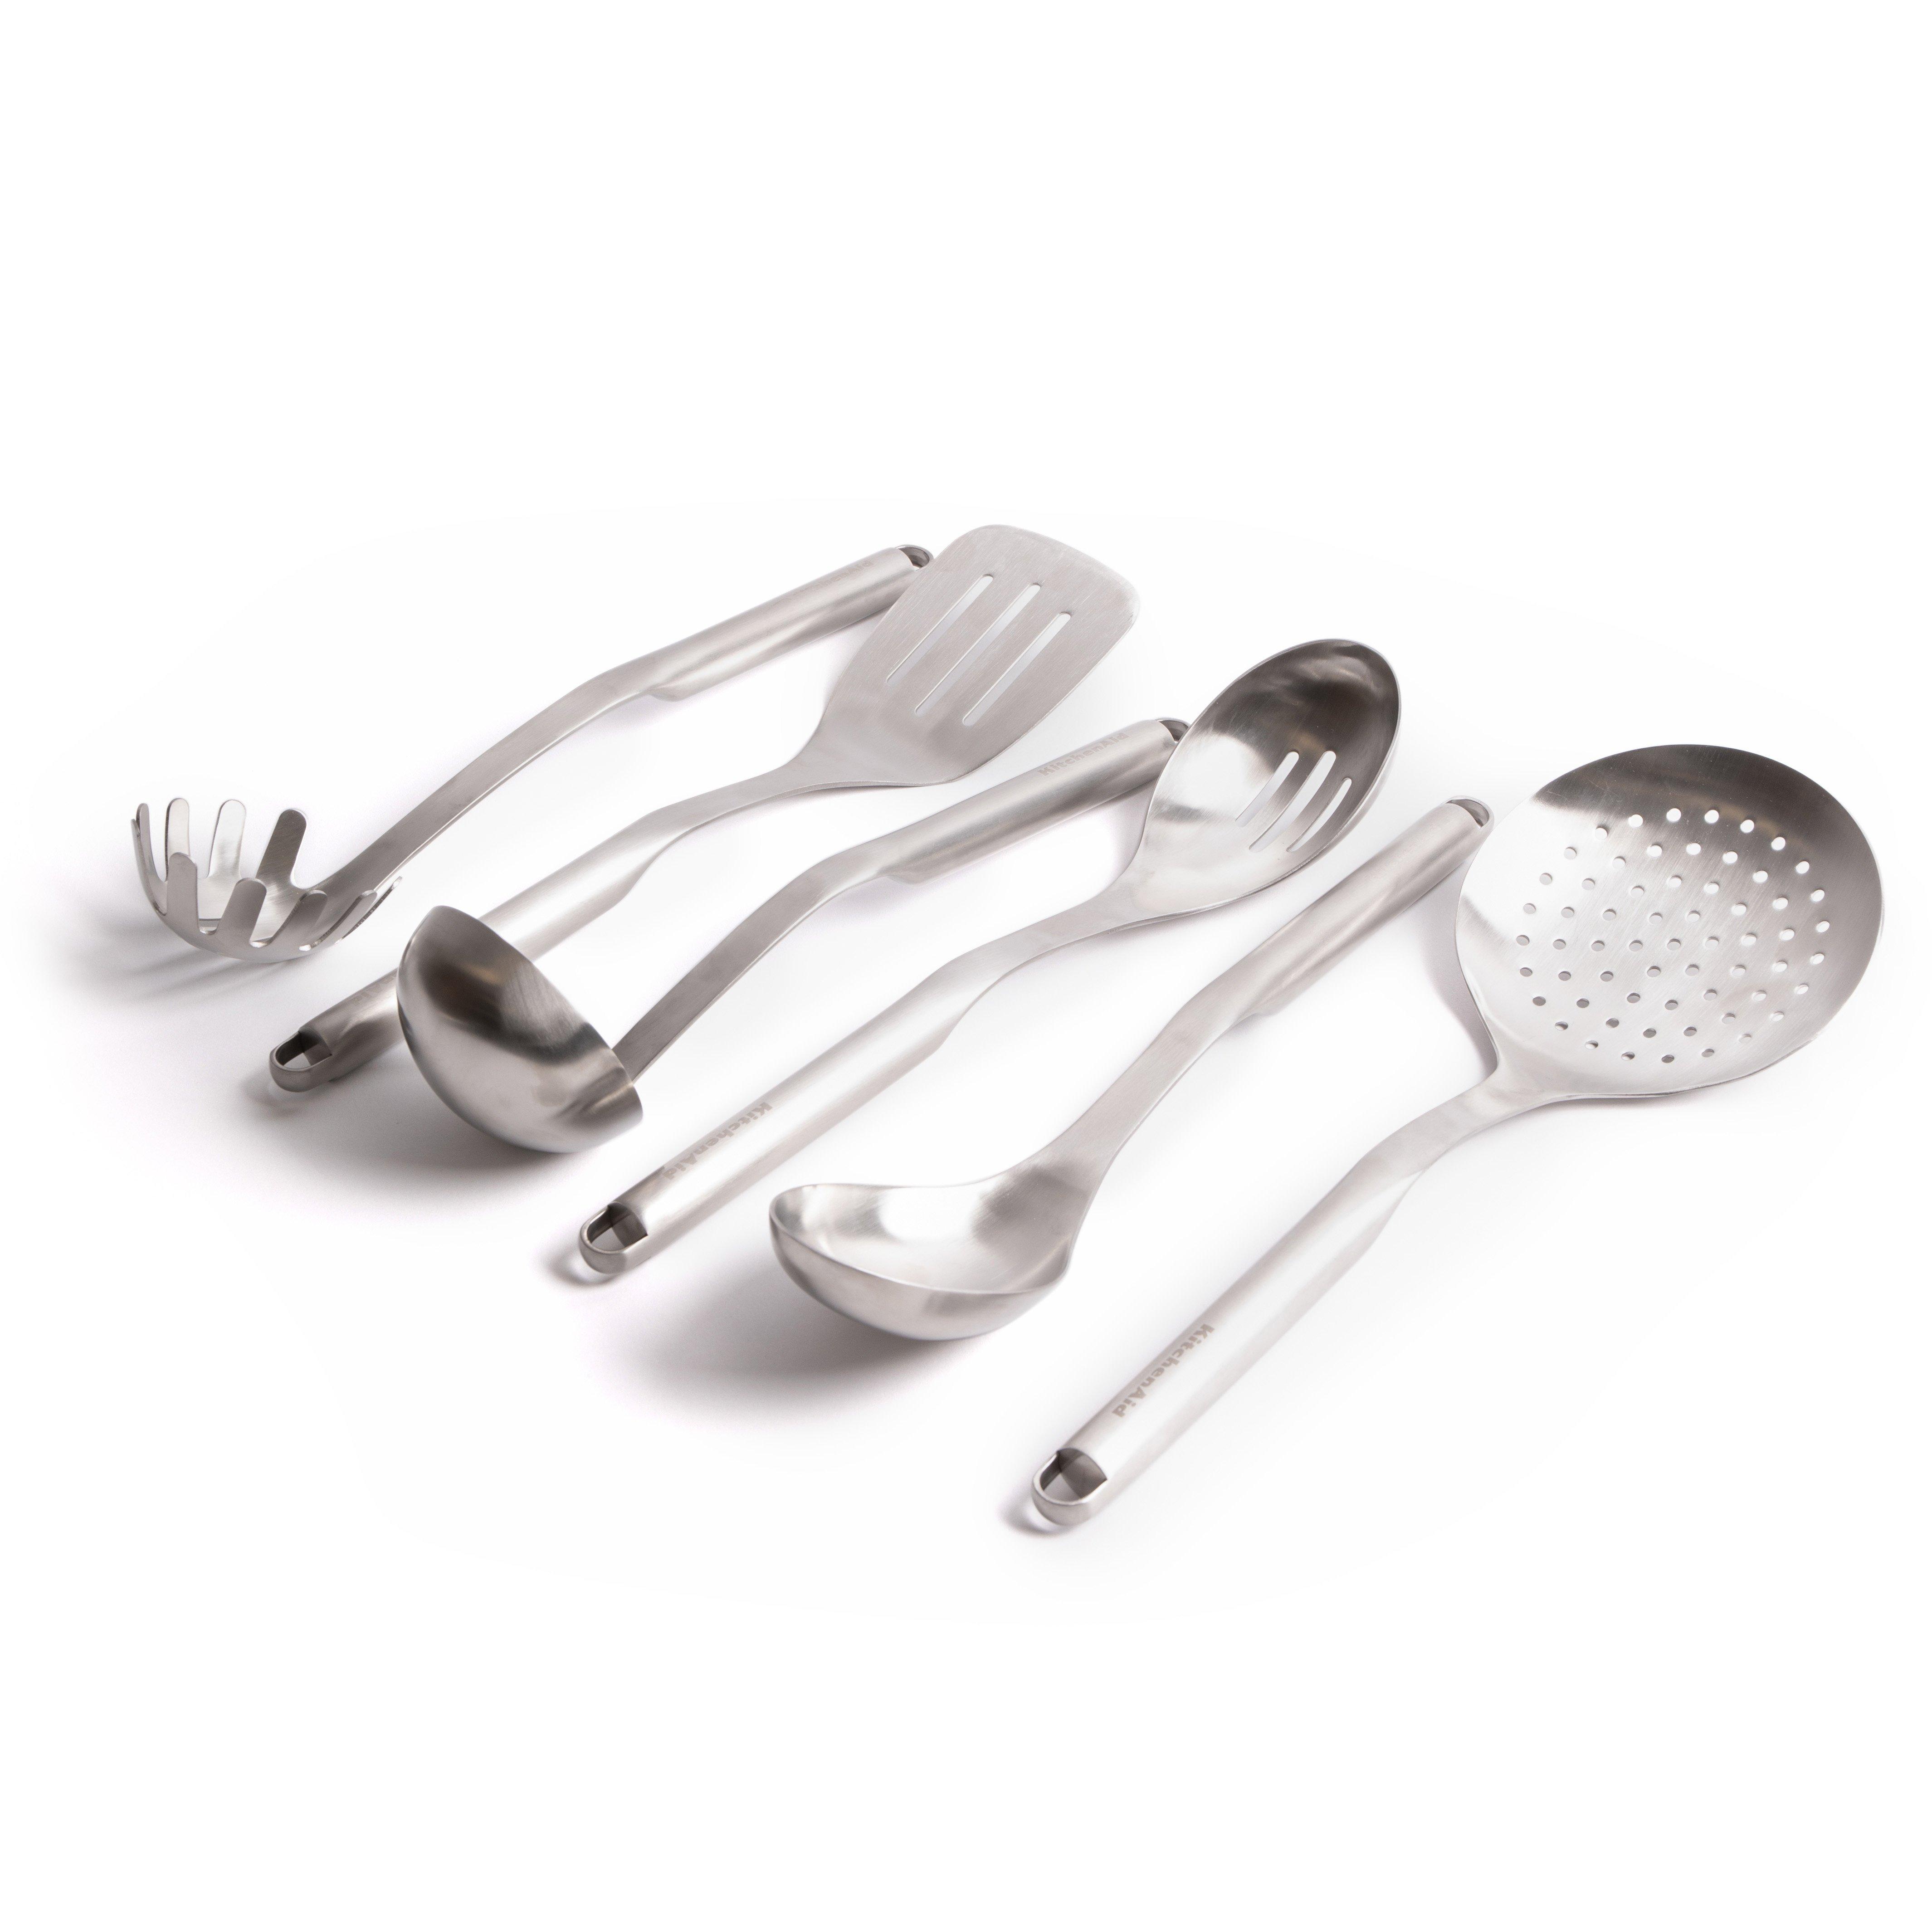 6pc Premium Stainless Steel Utensil Set with Slotted Spoon, Slotted Turner, Cooking Spoon, Ladle, Pa